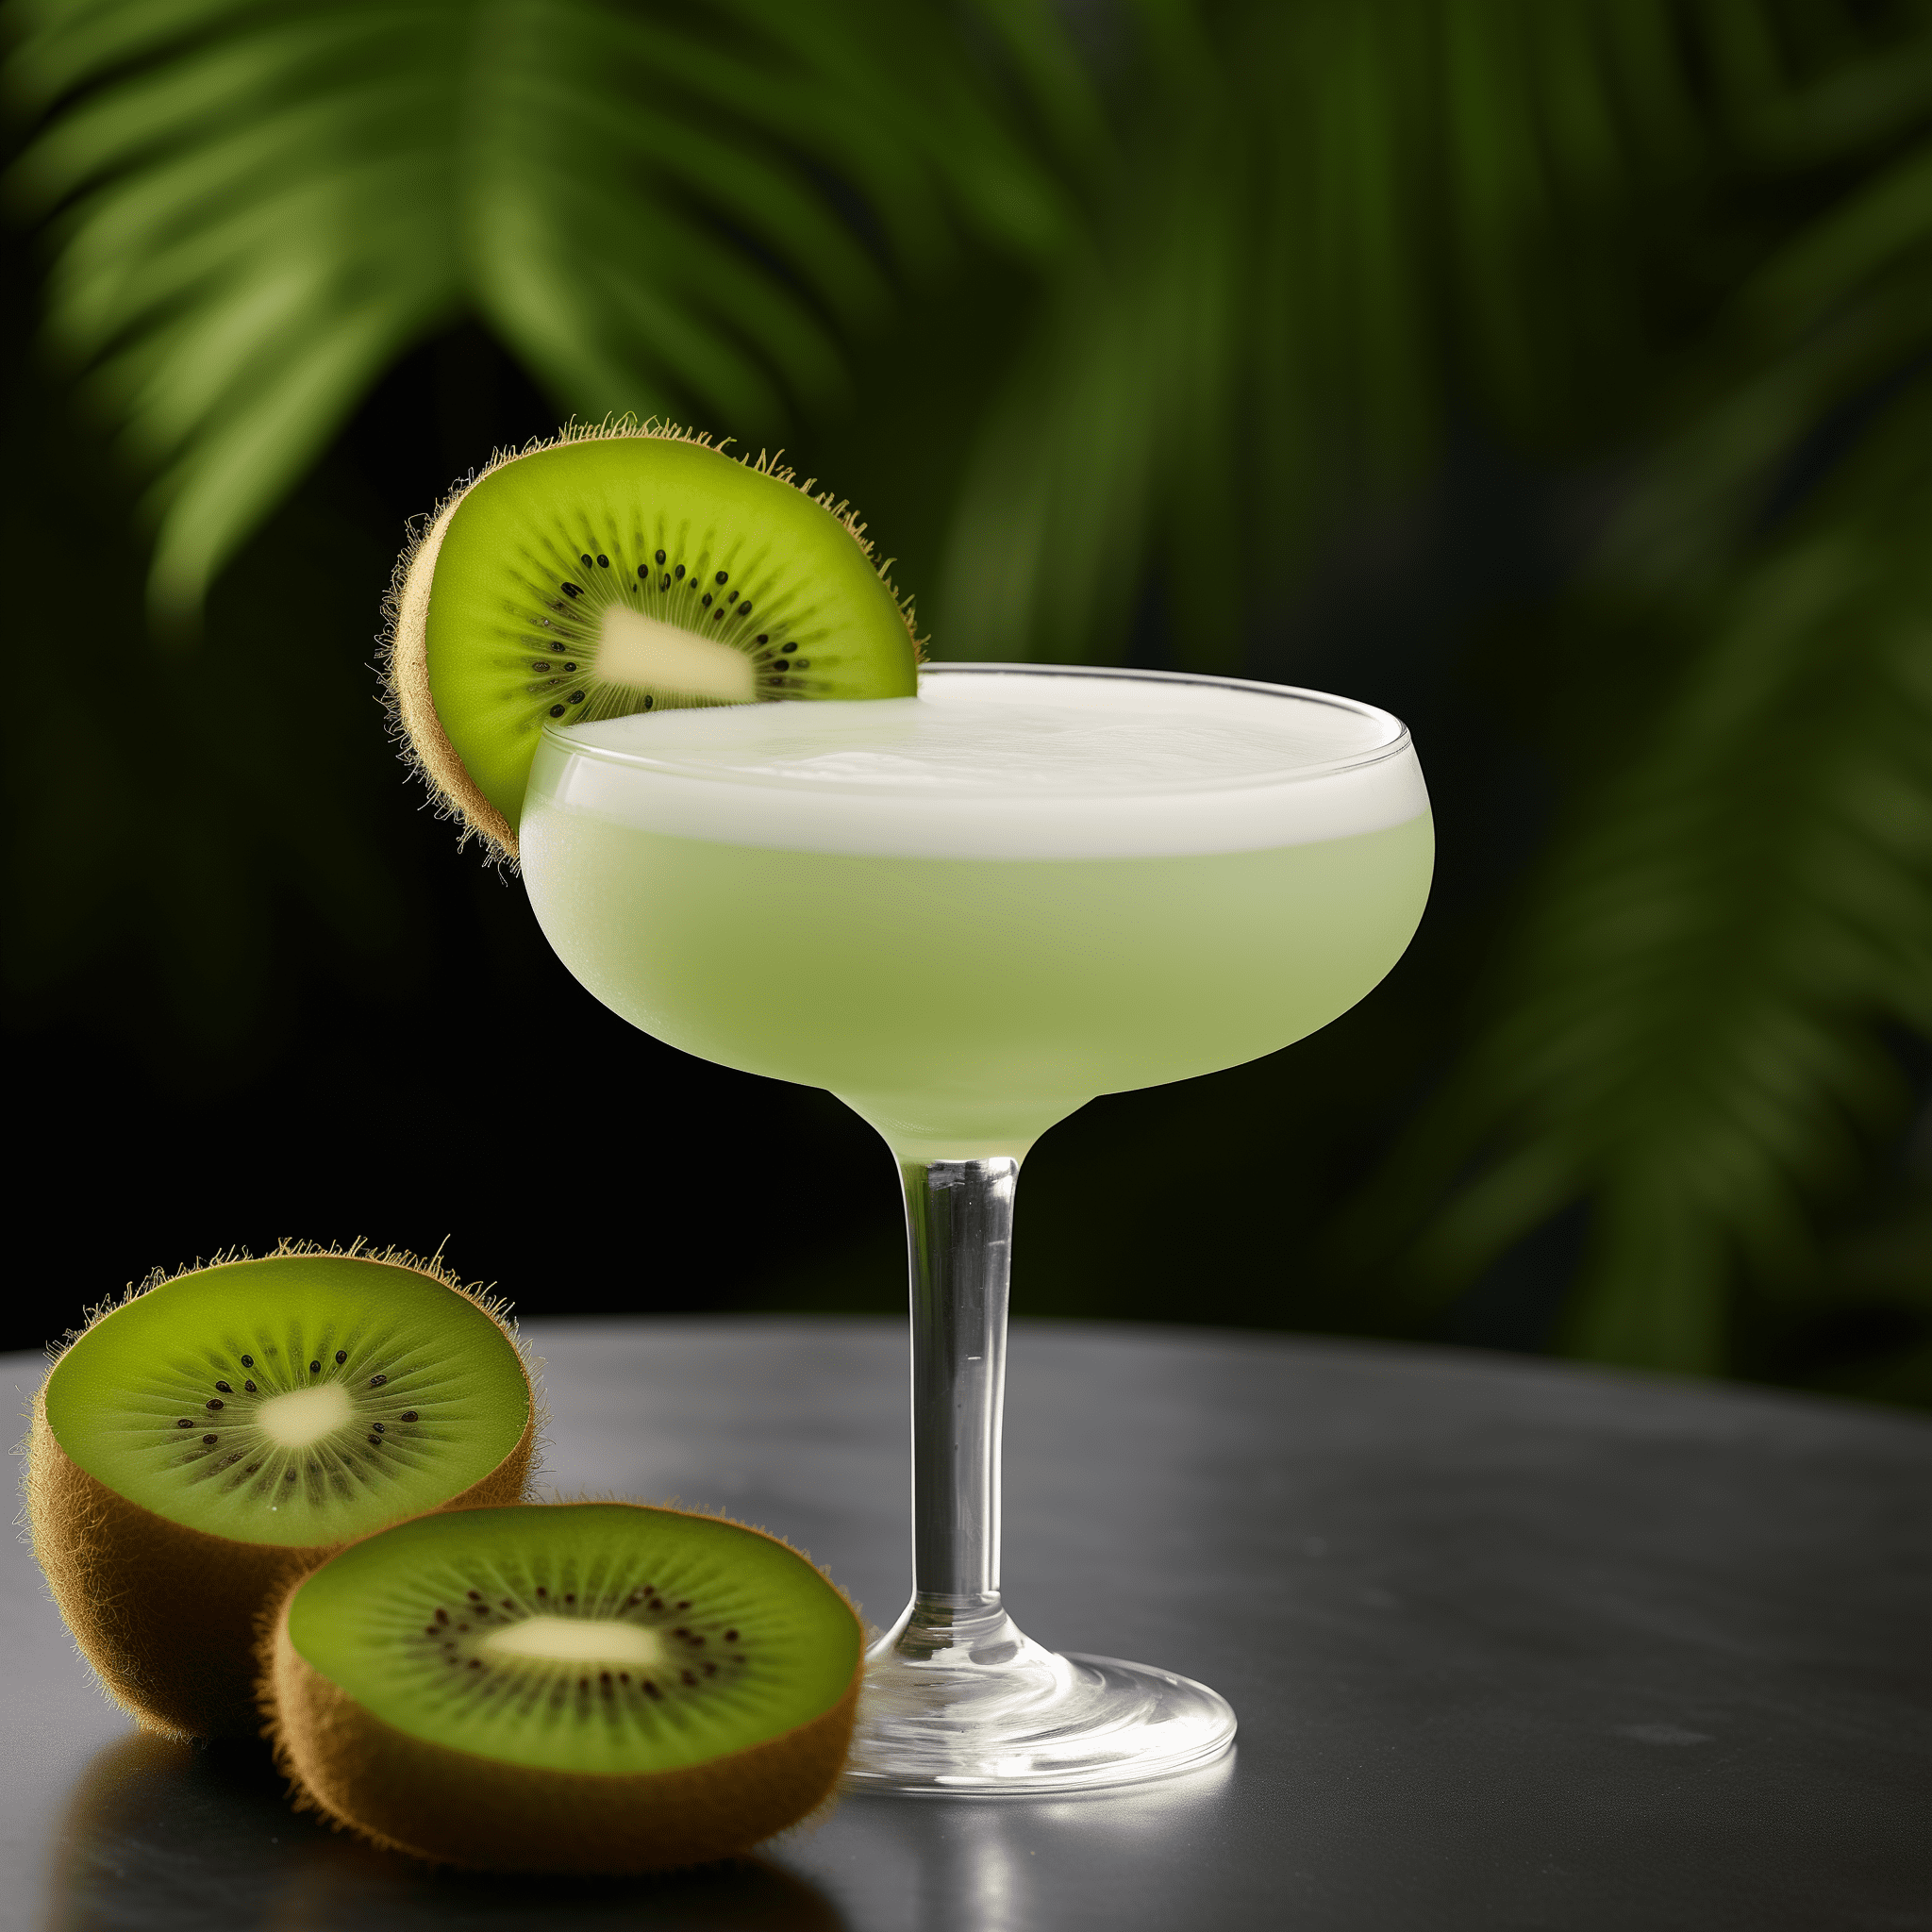 Gin Kiwi Sour Cocktail Recipe - The Gin Kiwi Sour is a harmonious blend of tart and sweet with a botanical backdrop. The kiwi lends a juicy, tropical sweetness that balances the sharpness of the gin and the acidity of the lemon. It's a refreshing, vibrant, and slightly earthy cocktail that's perfect for sipping on a warm day.